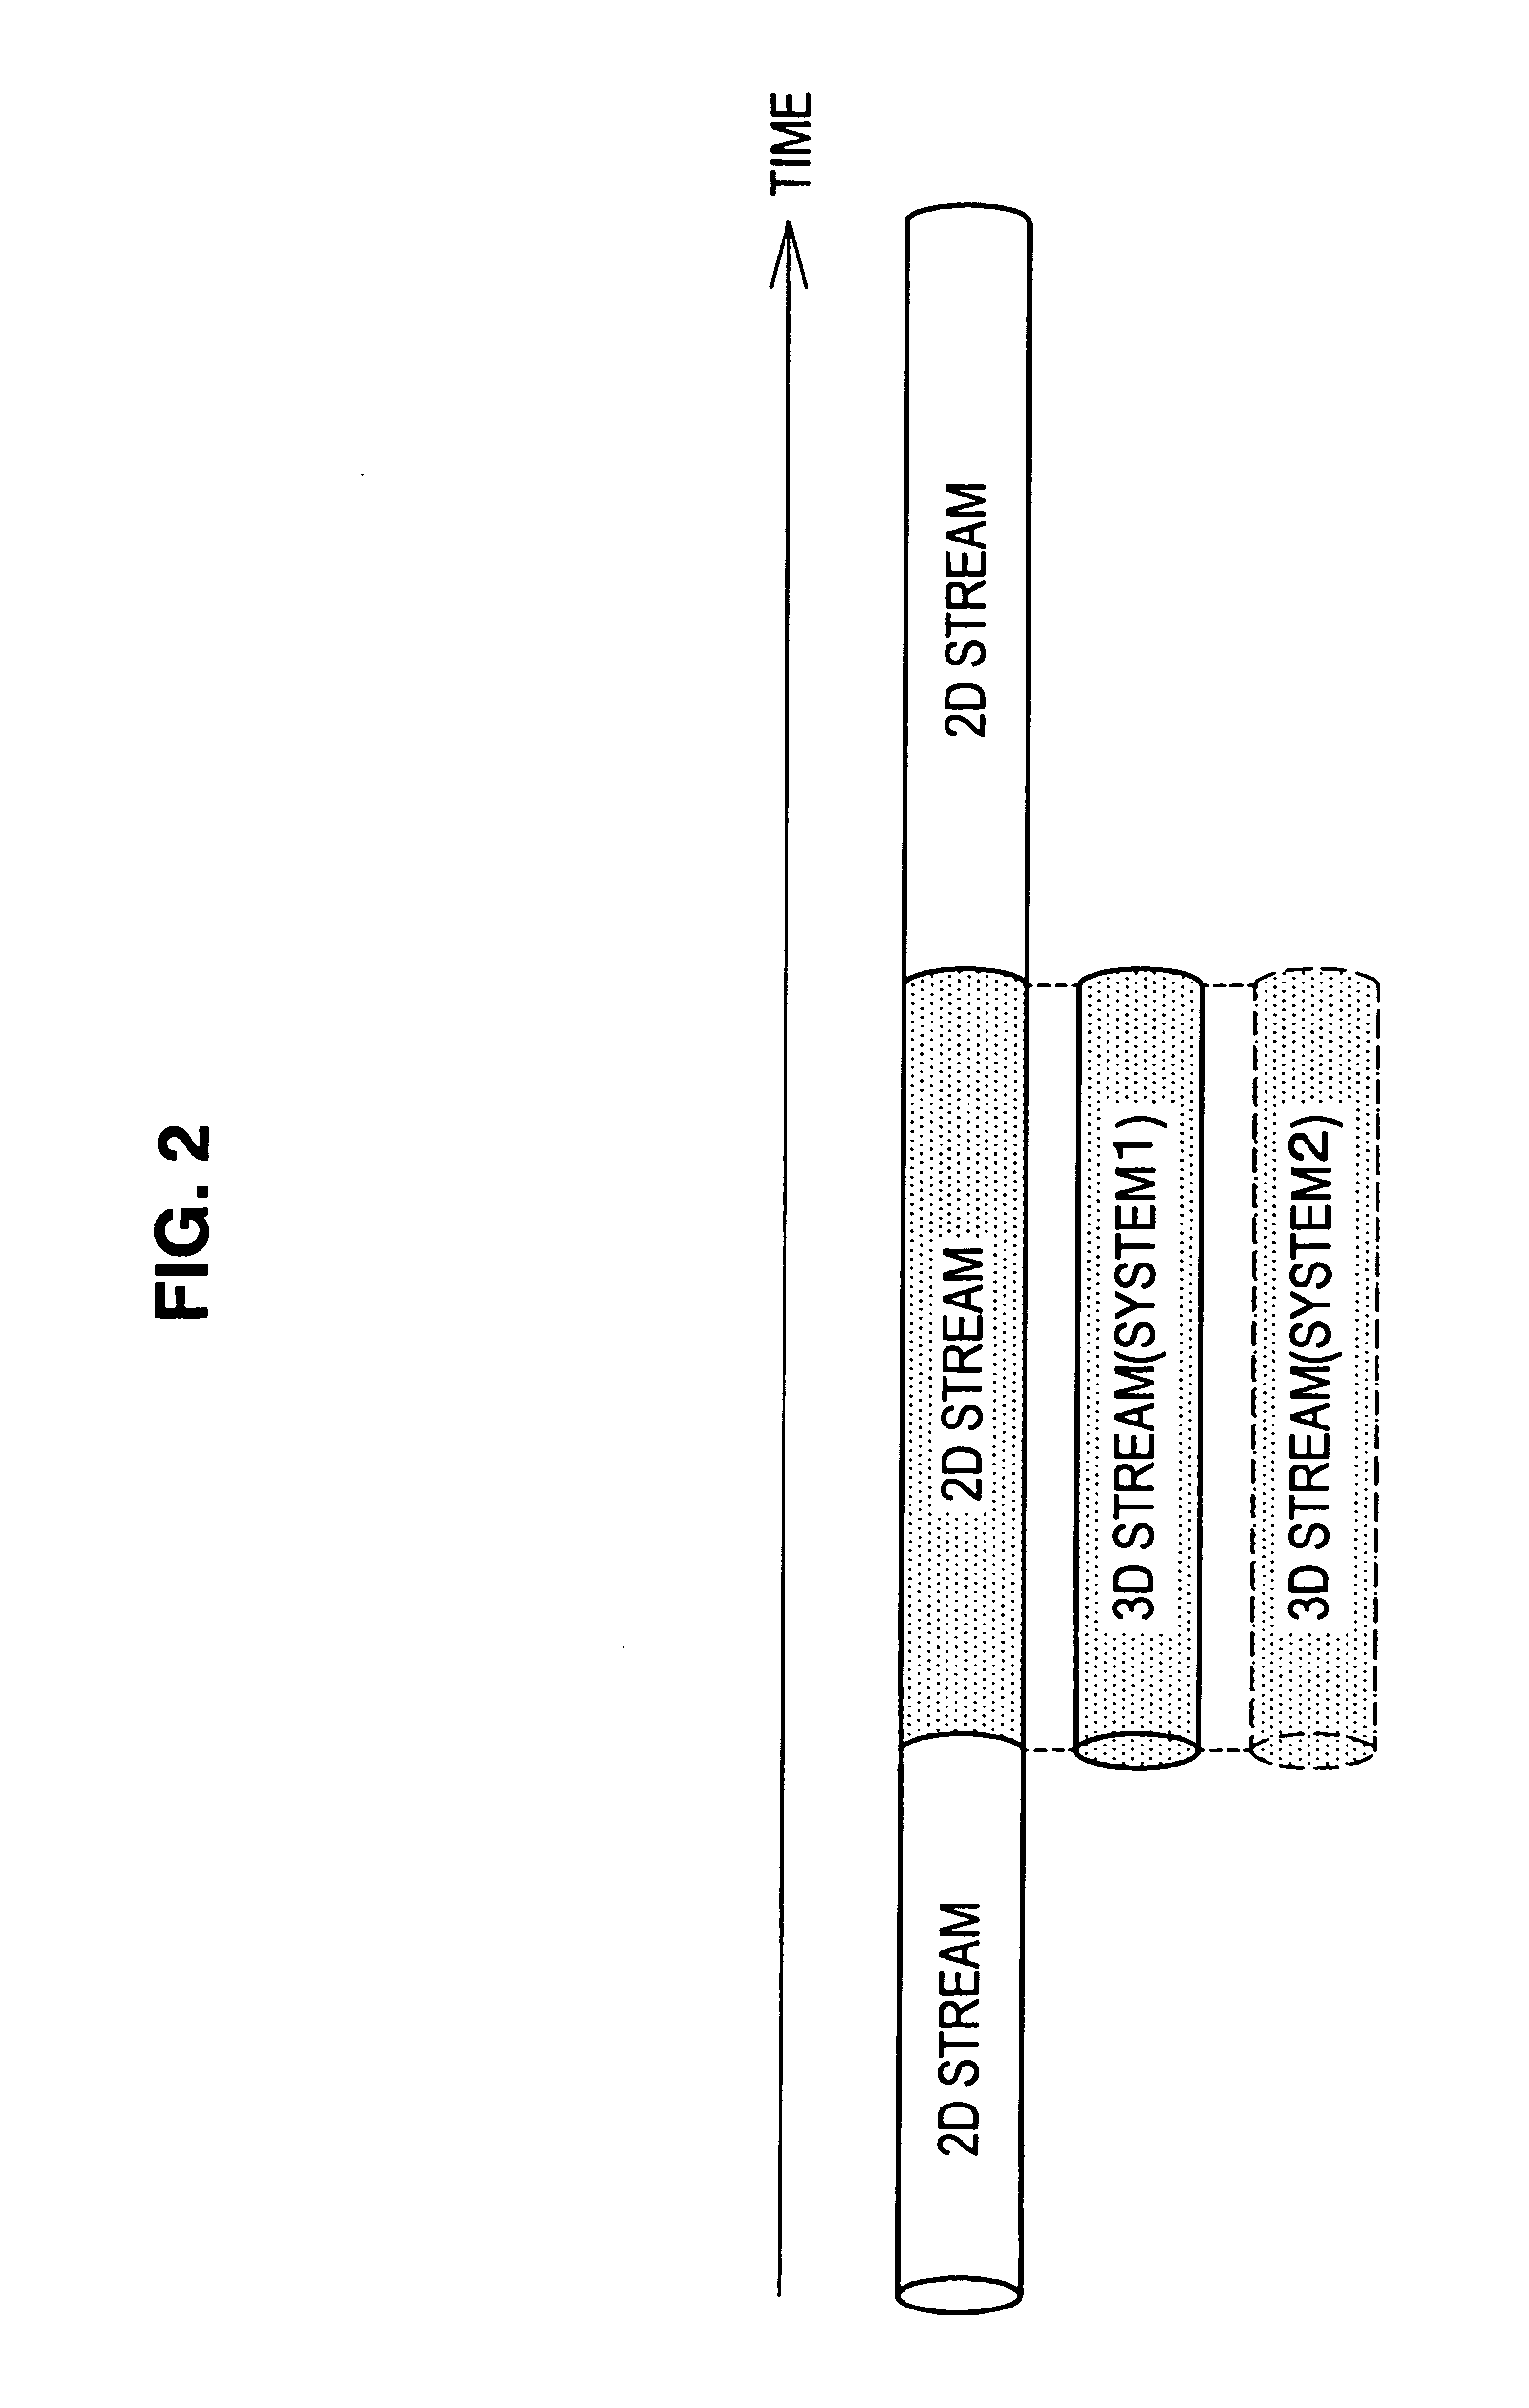 Content transmission method and display device